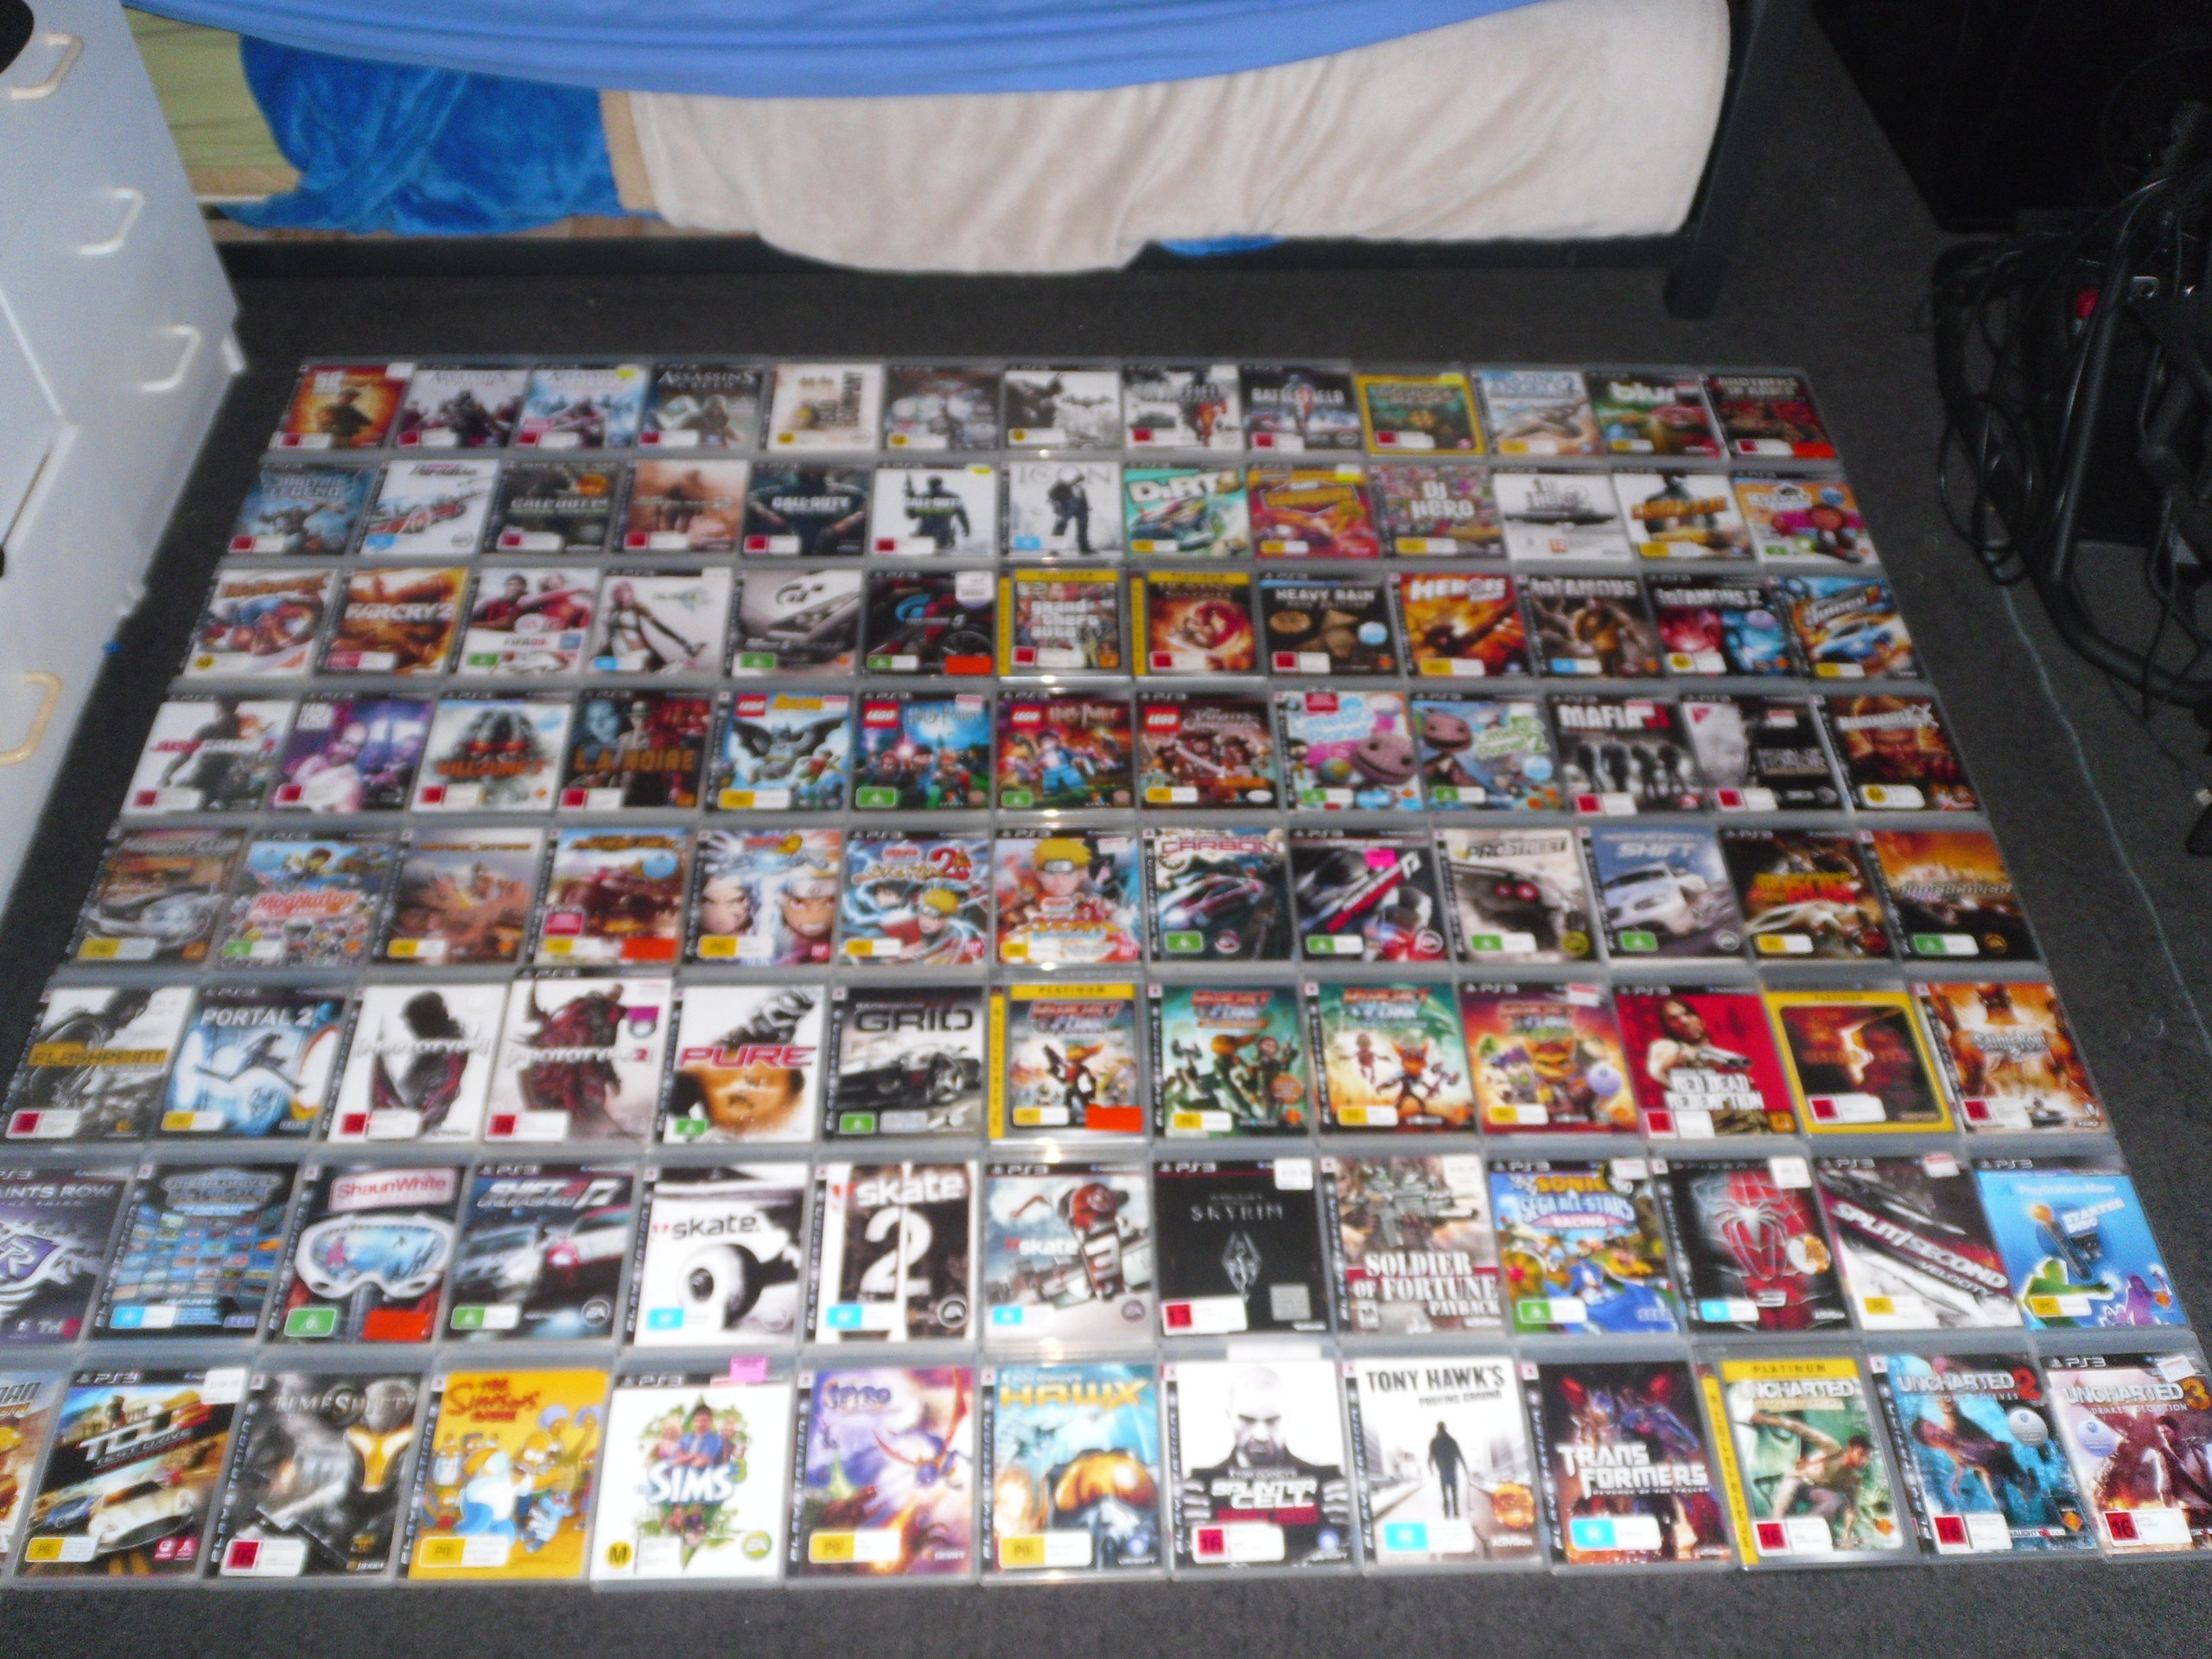 My-PS3-collection-video-games-31095111-2560-1920.jpg